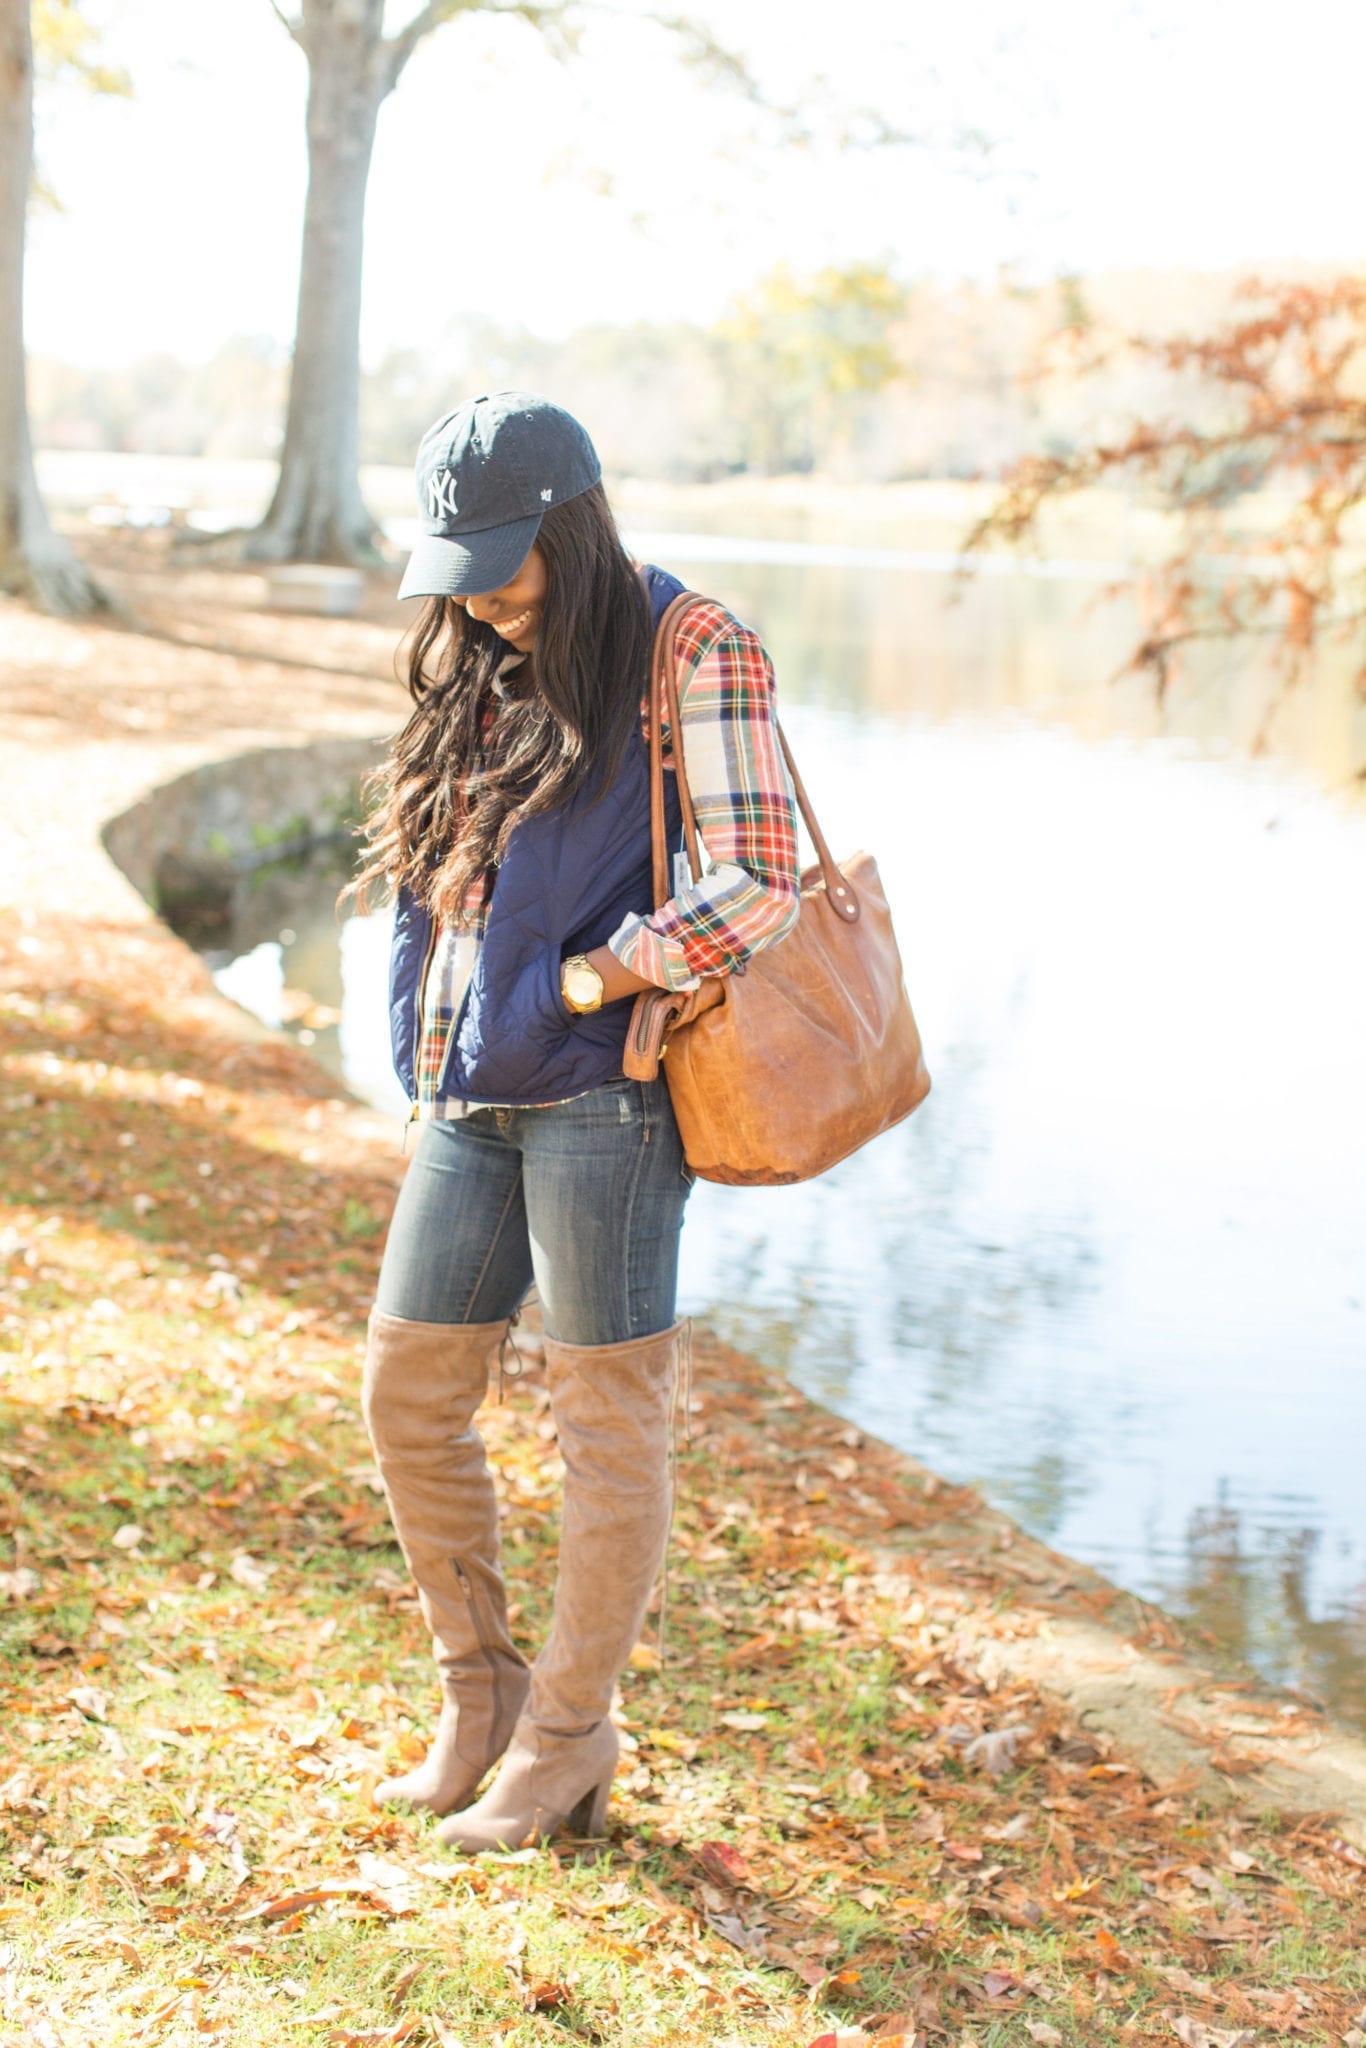 Wondering what to wear for thanksgiving this year? I'm partnering with Old Navy to share my favorite casual outfit ideas! Check out these looks on the blog! // Shot at Furman Univeristy by Southern Fashion + Lifestlye Blogger, GoodTomiCha